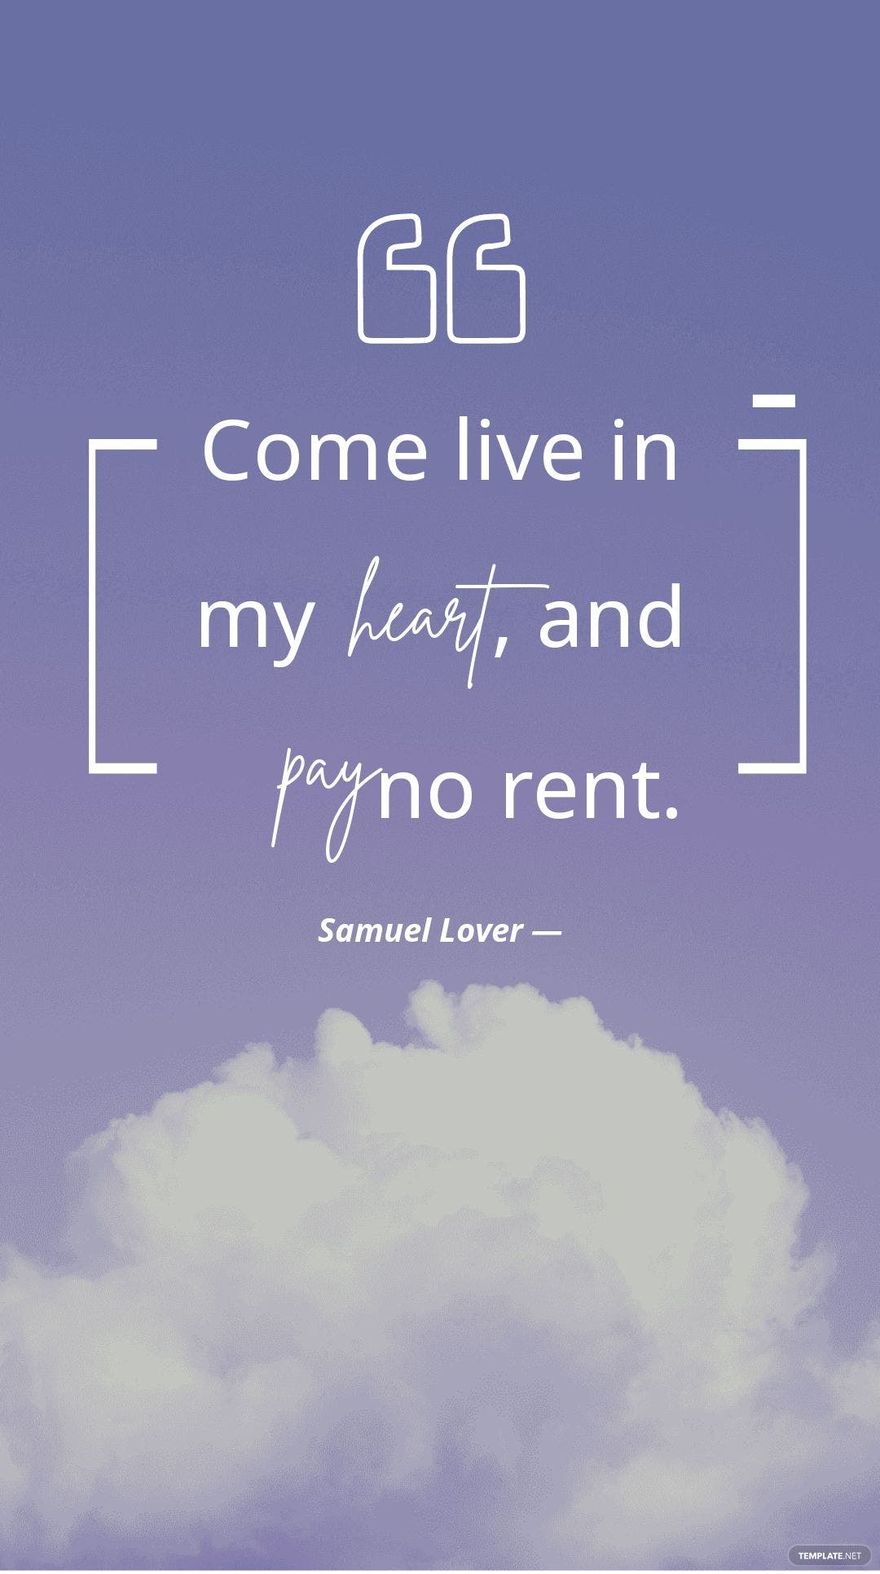 Samuel Lover — Come live in my heart, and pay no rent.